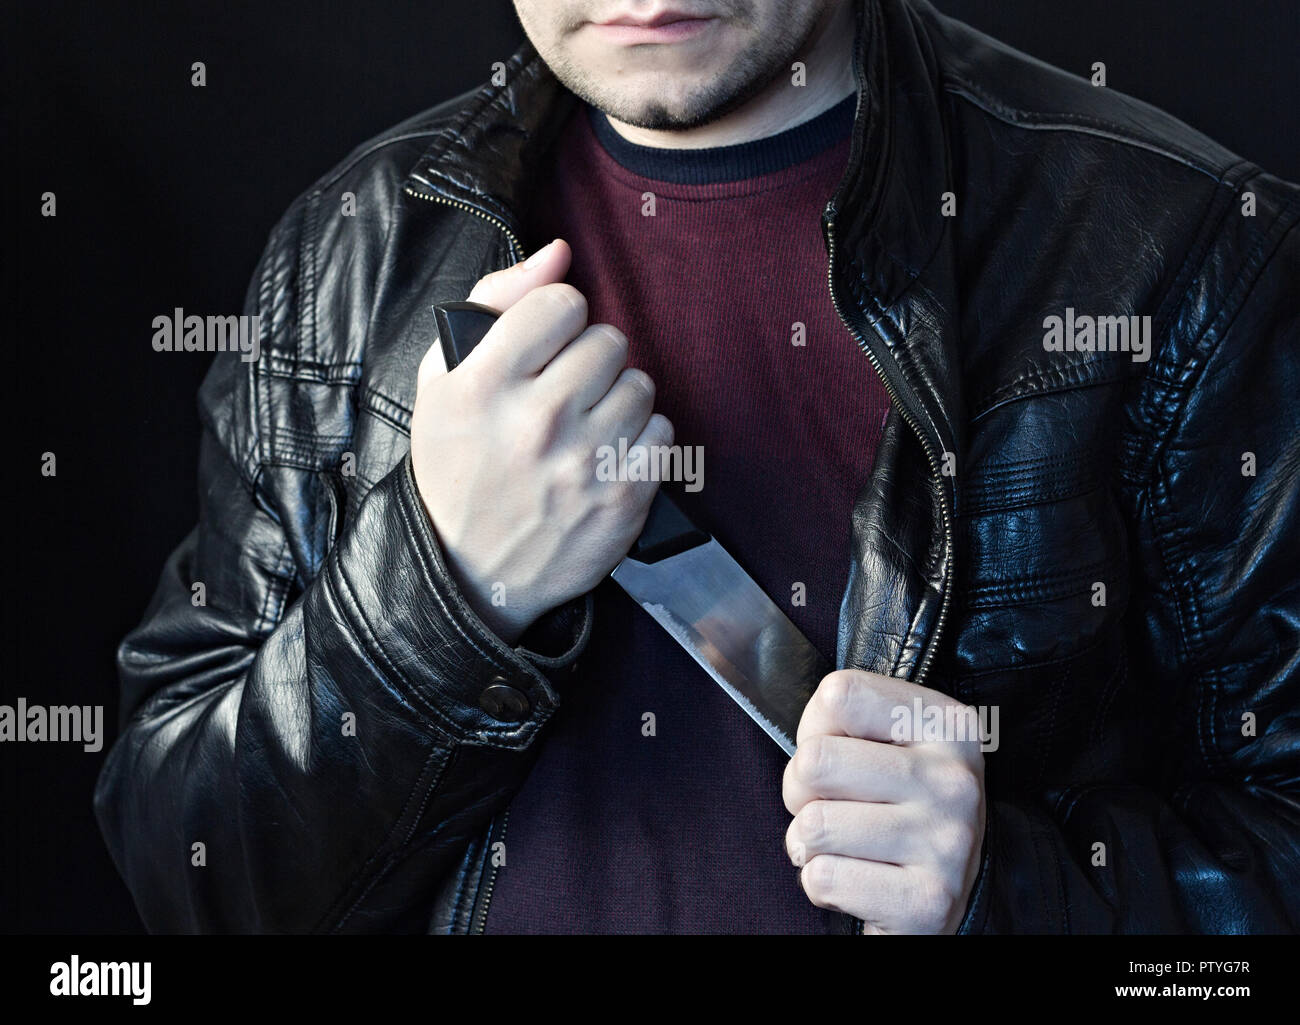 A man takes a knife out of a jacket, a black background Stock Photo